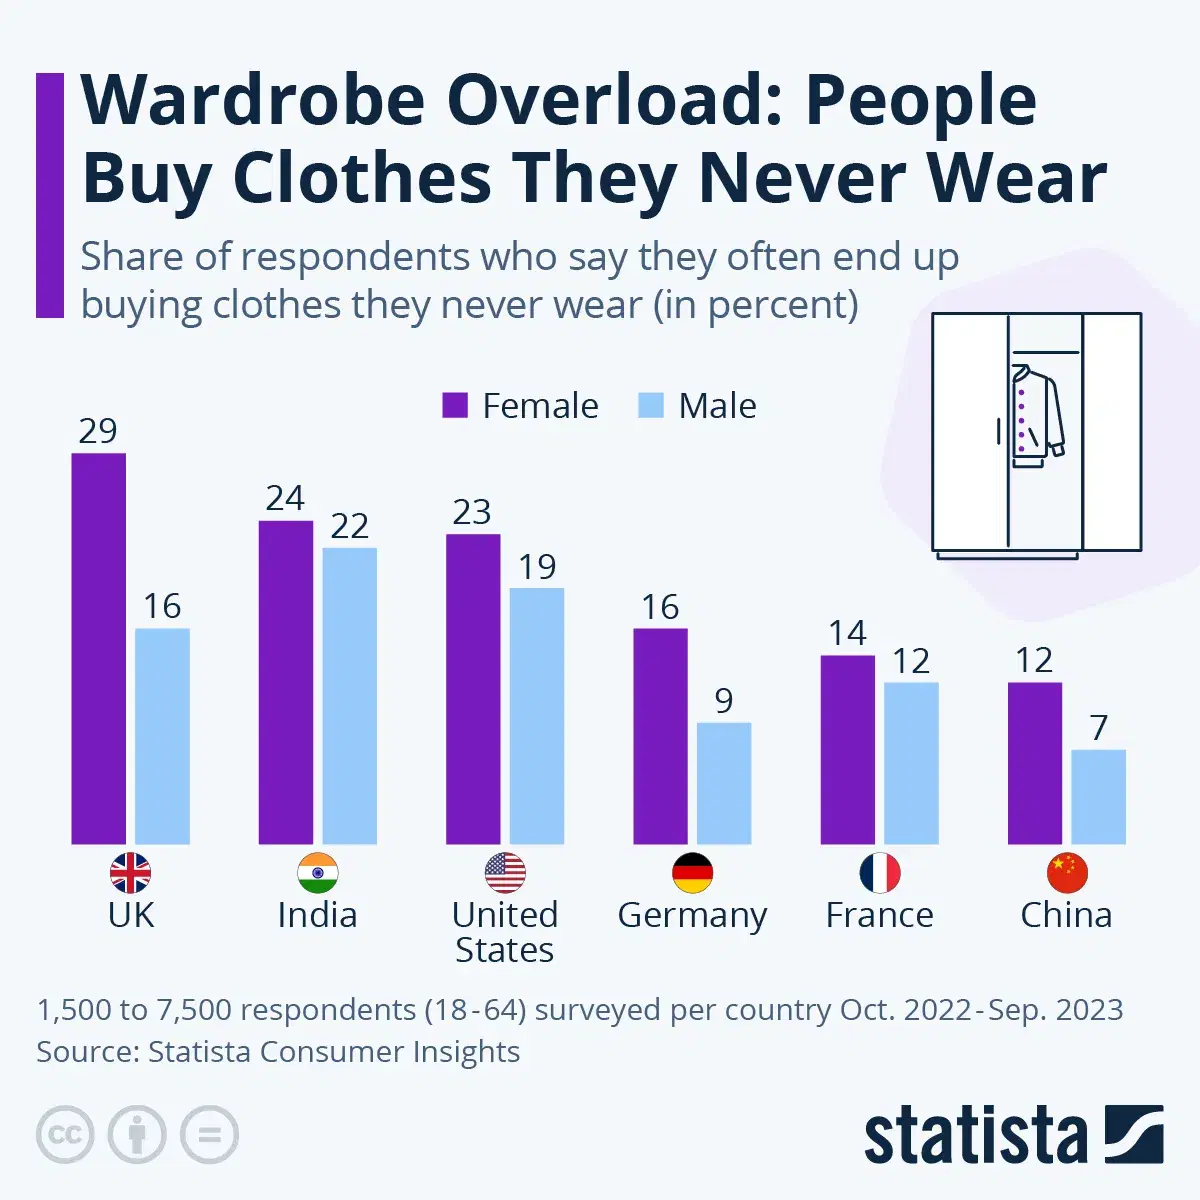 Share of People Who Buy Clothes They'll Never Wear, by Country